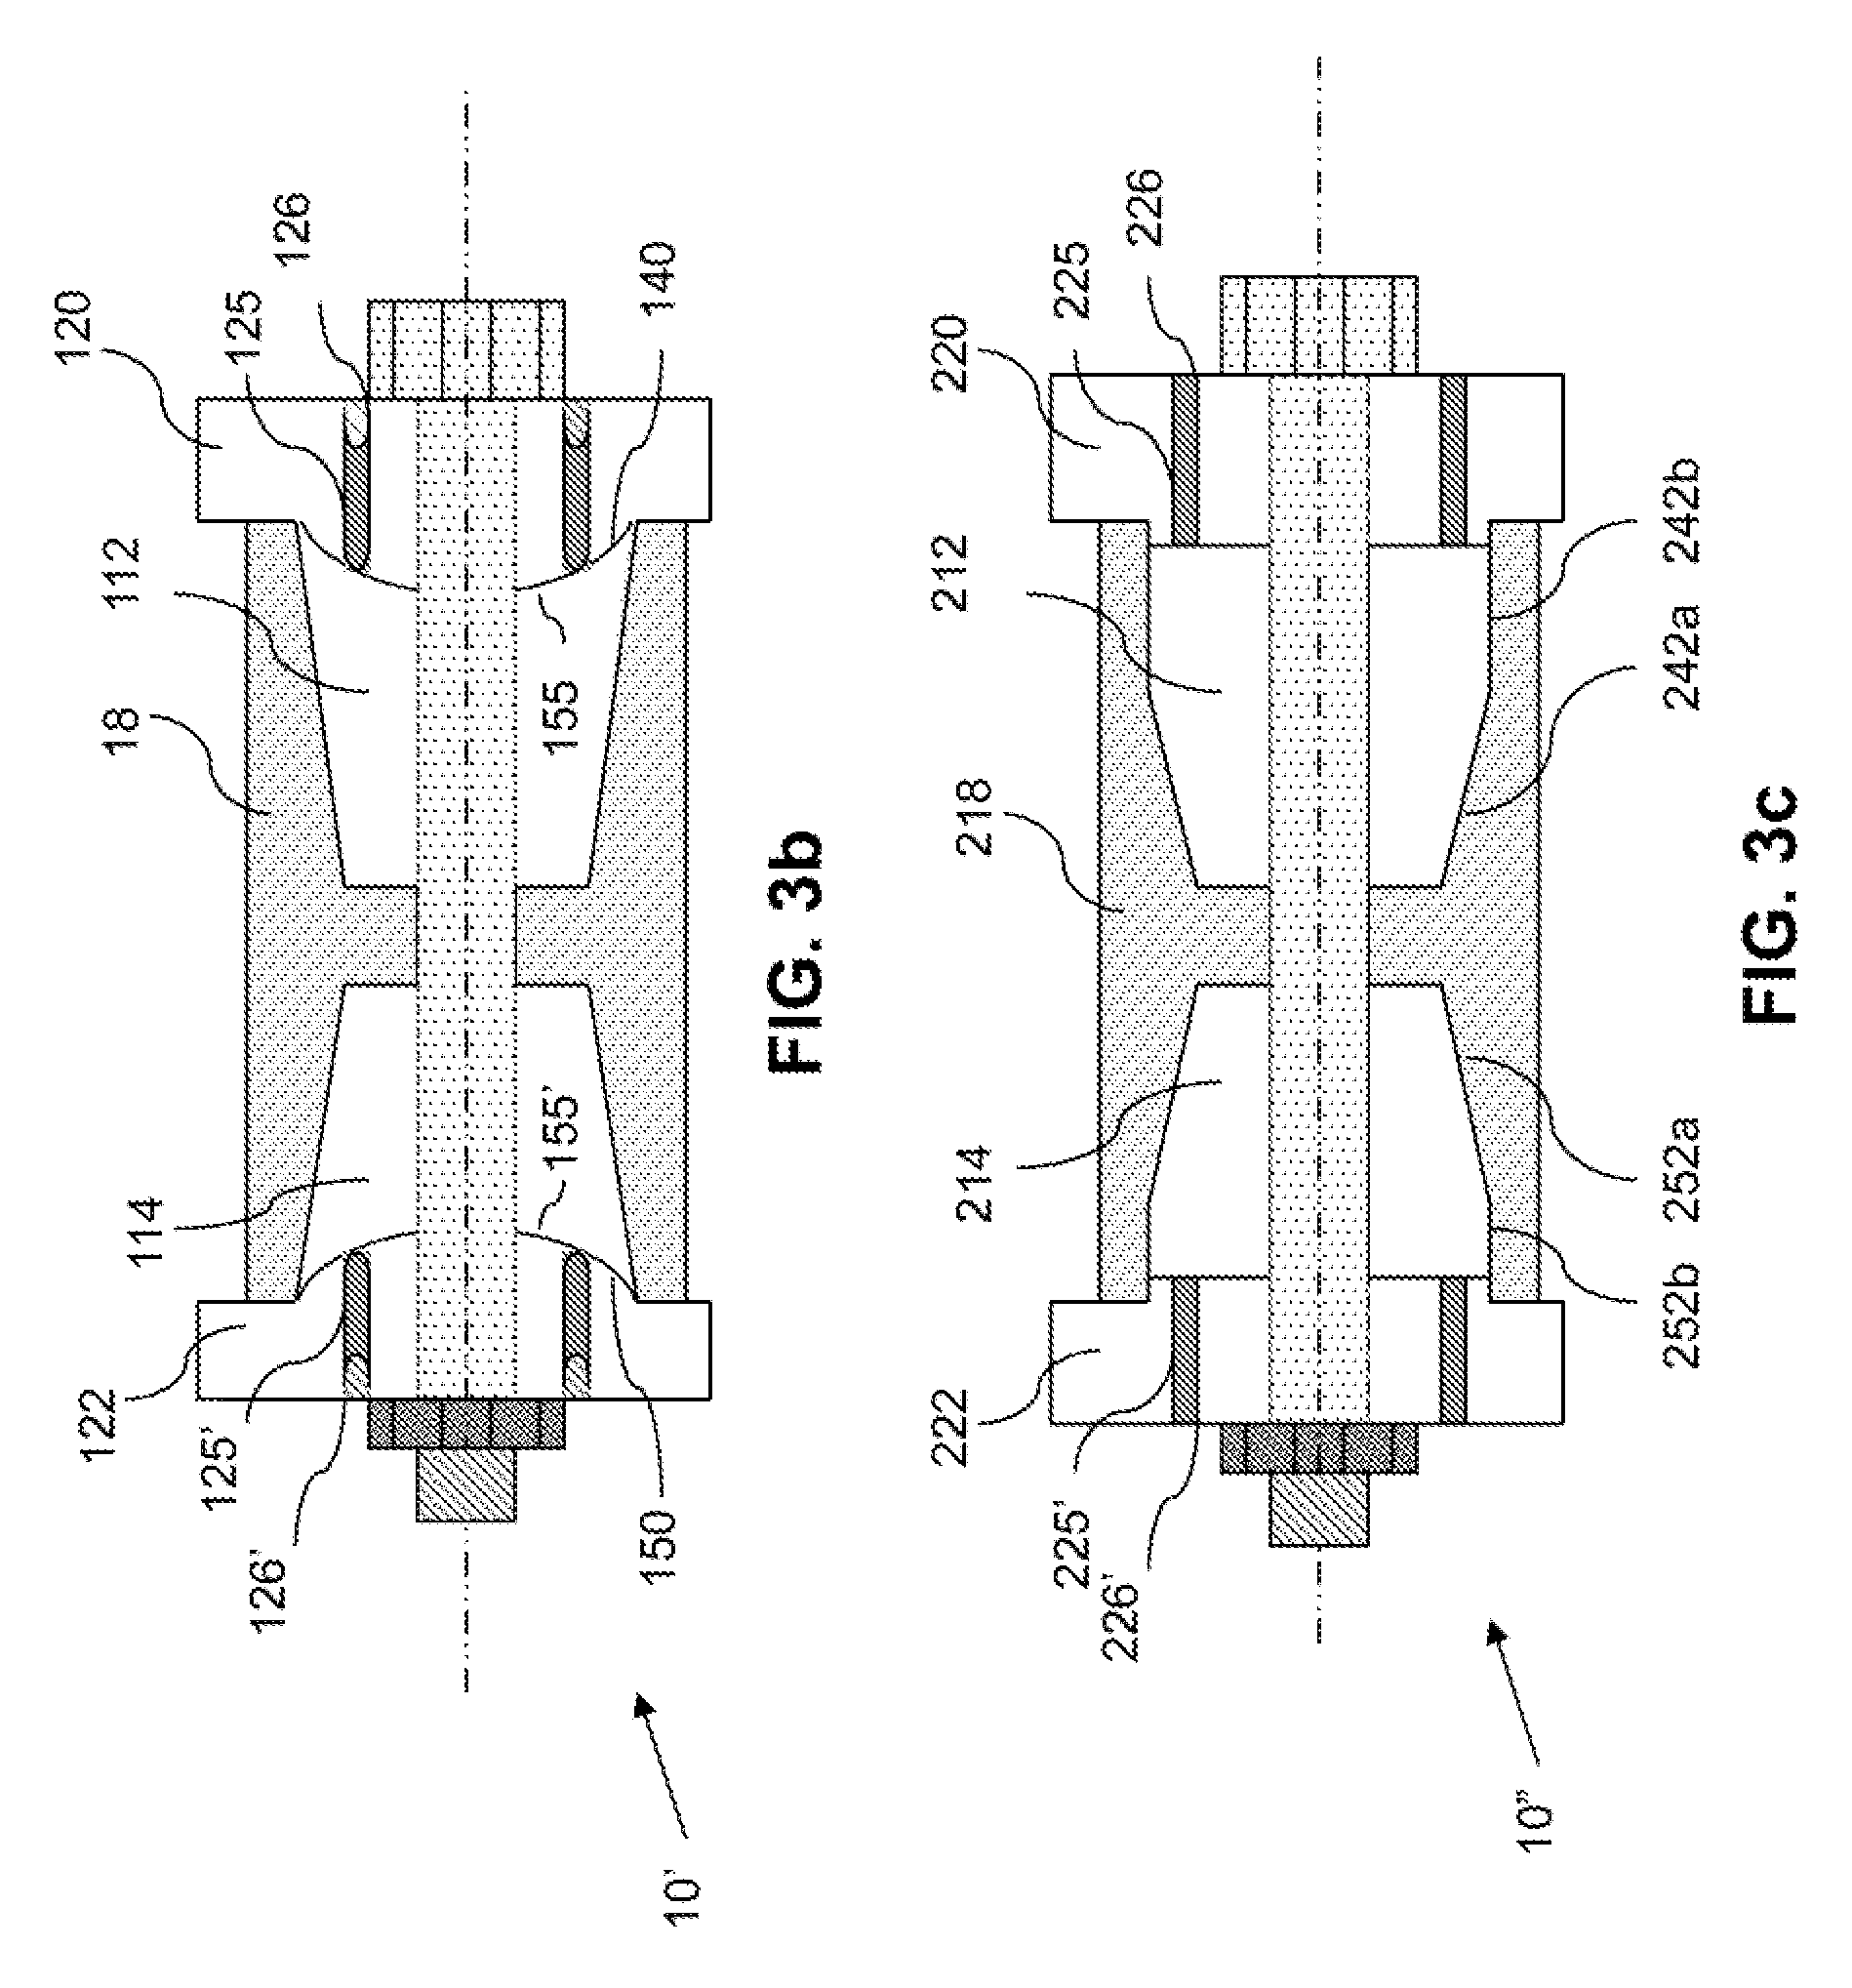 Demountable pin and collet assembly and method to securely fasten a ranging arm to a longwall shearer using such assembly